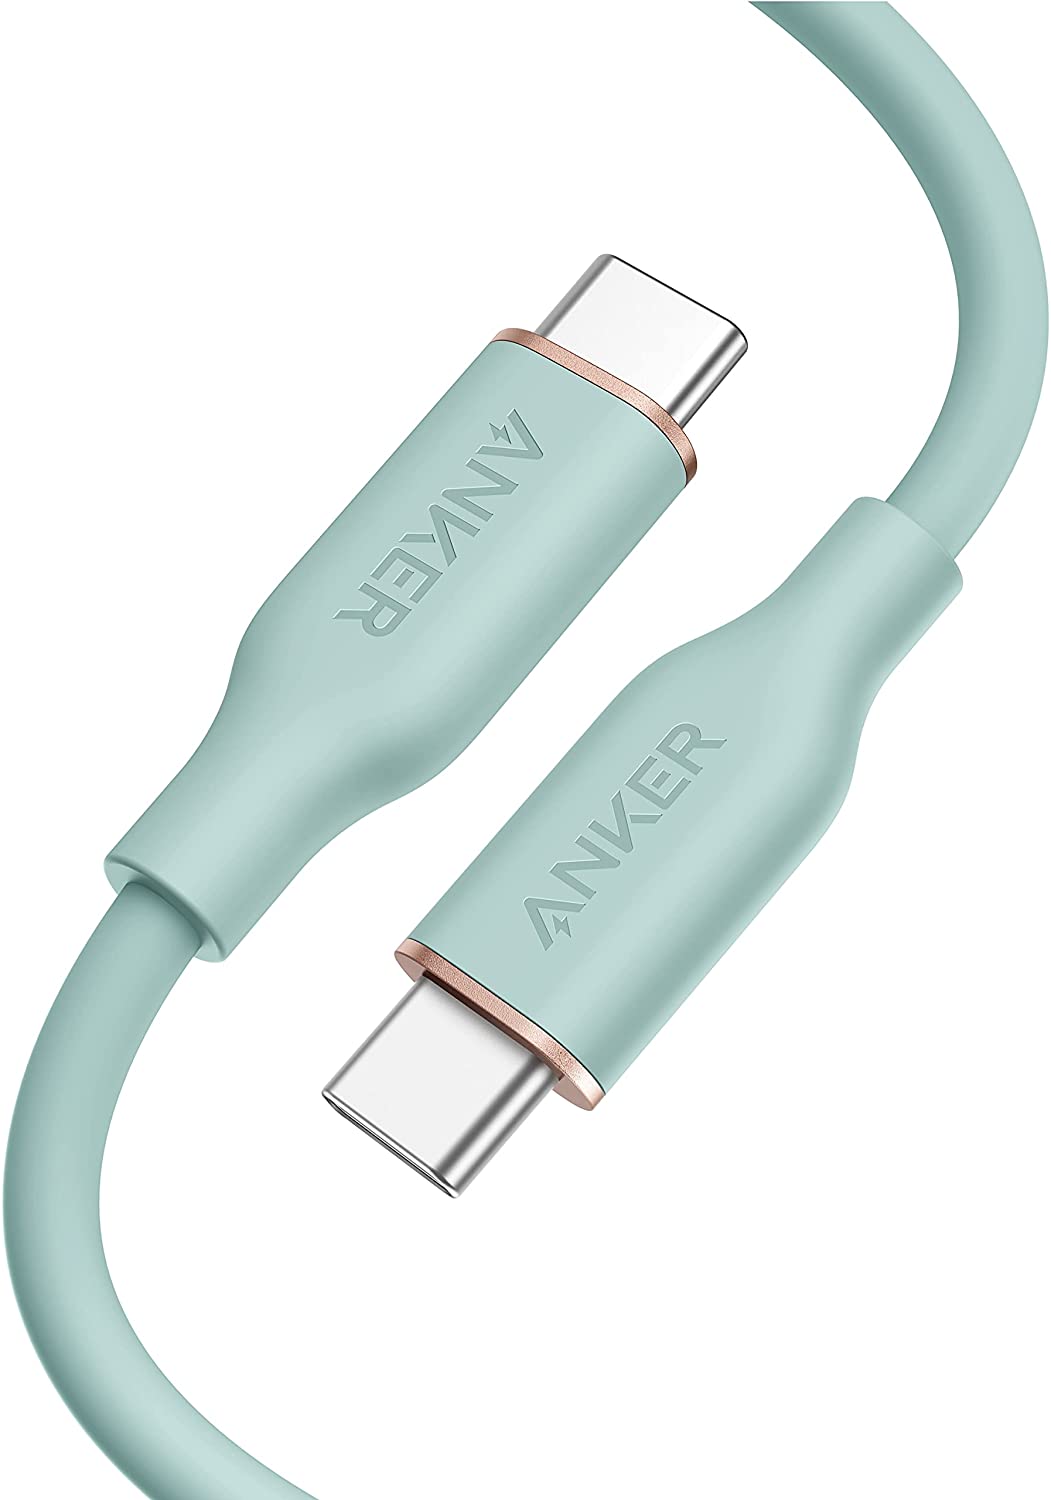 Anker USB-C to USB-C Cable , 643 Charging Cable 100W ,3ft/6ft ,Black/White/Blue/Green